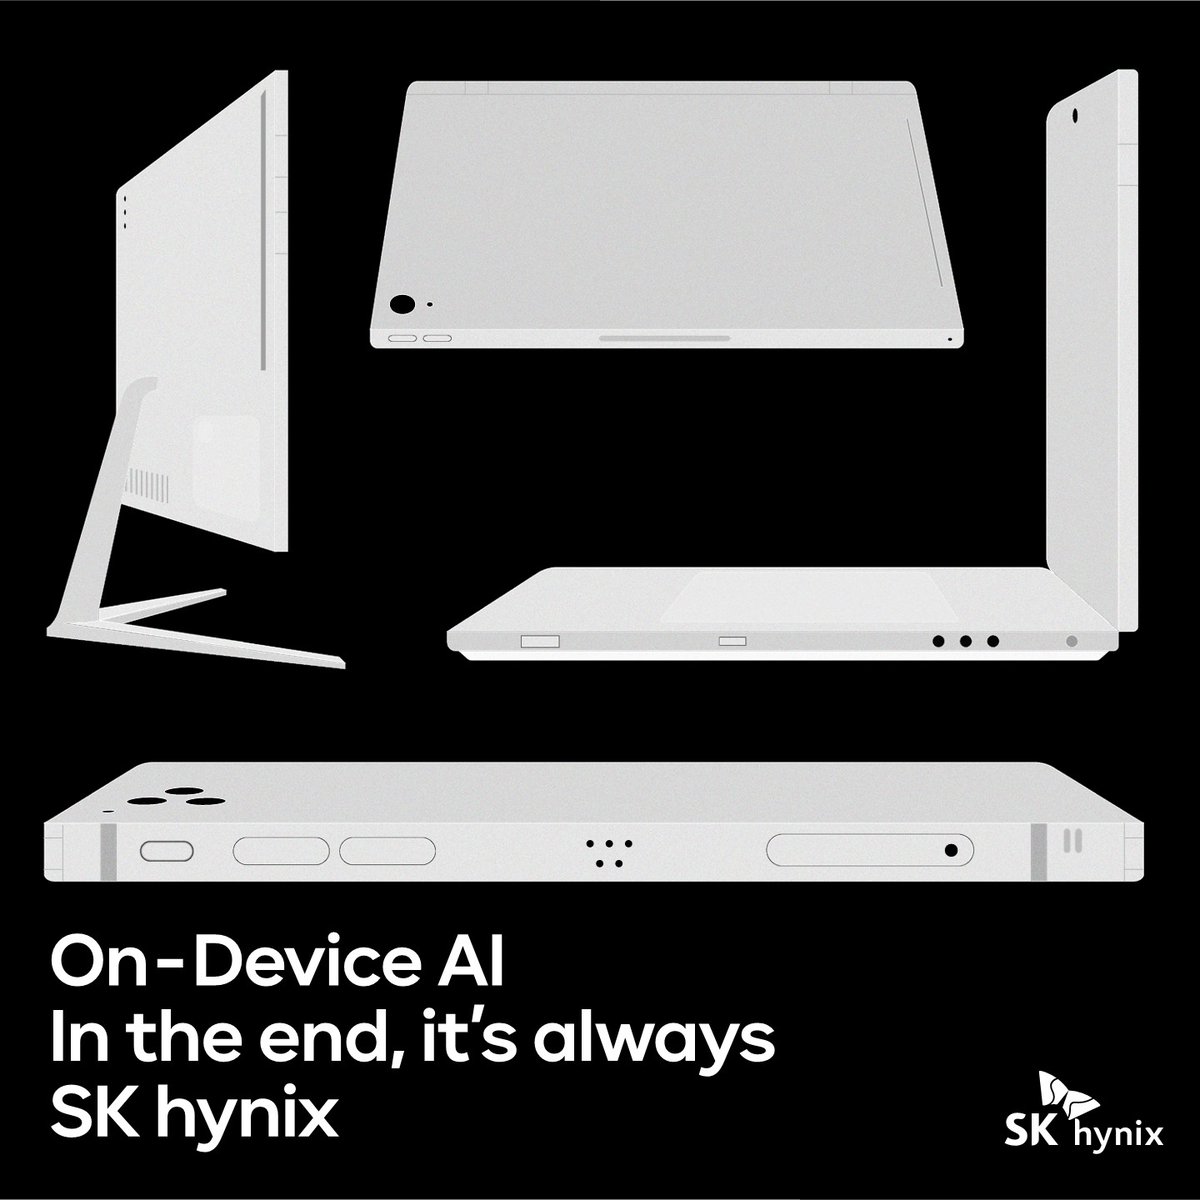 How will our daily lives change with on-device AI? 🤖 @SKhynix is maximizing PC performance through #AI memory. Get ready for a smarter, faster life with @SKhynix! #SKhynix #OnDeviceAI #PC